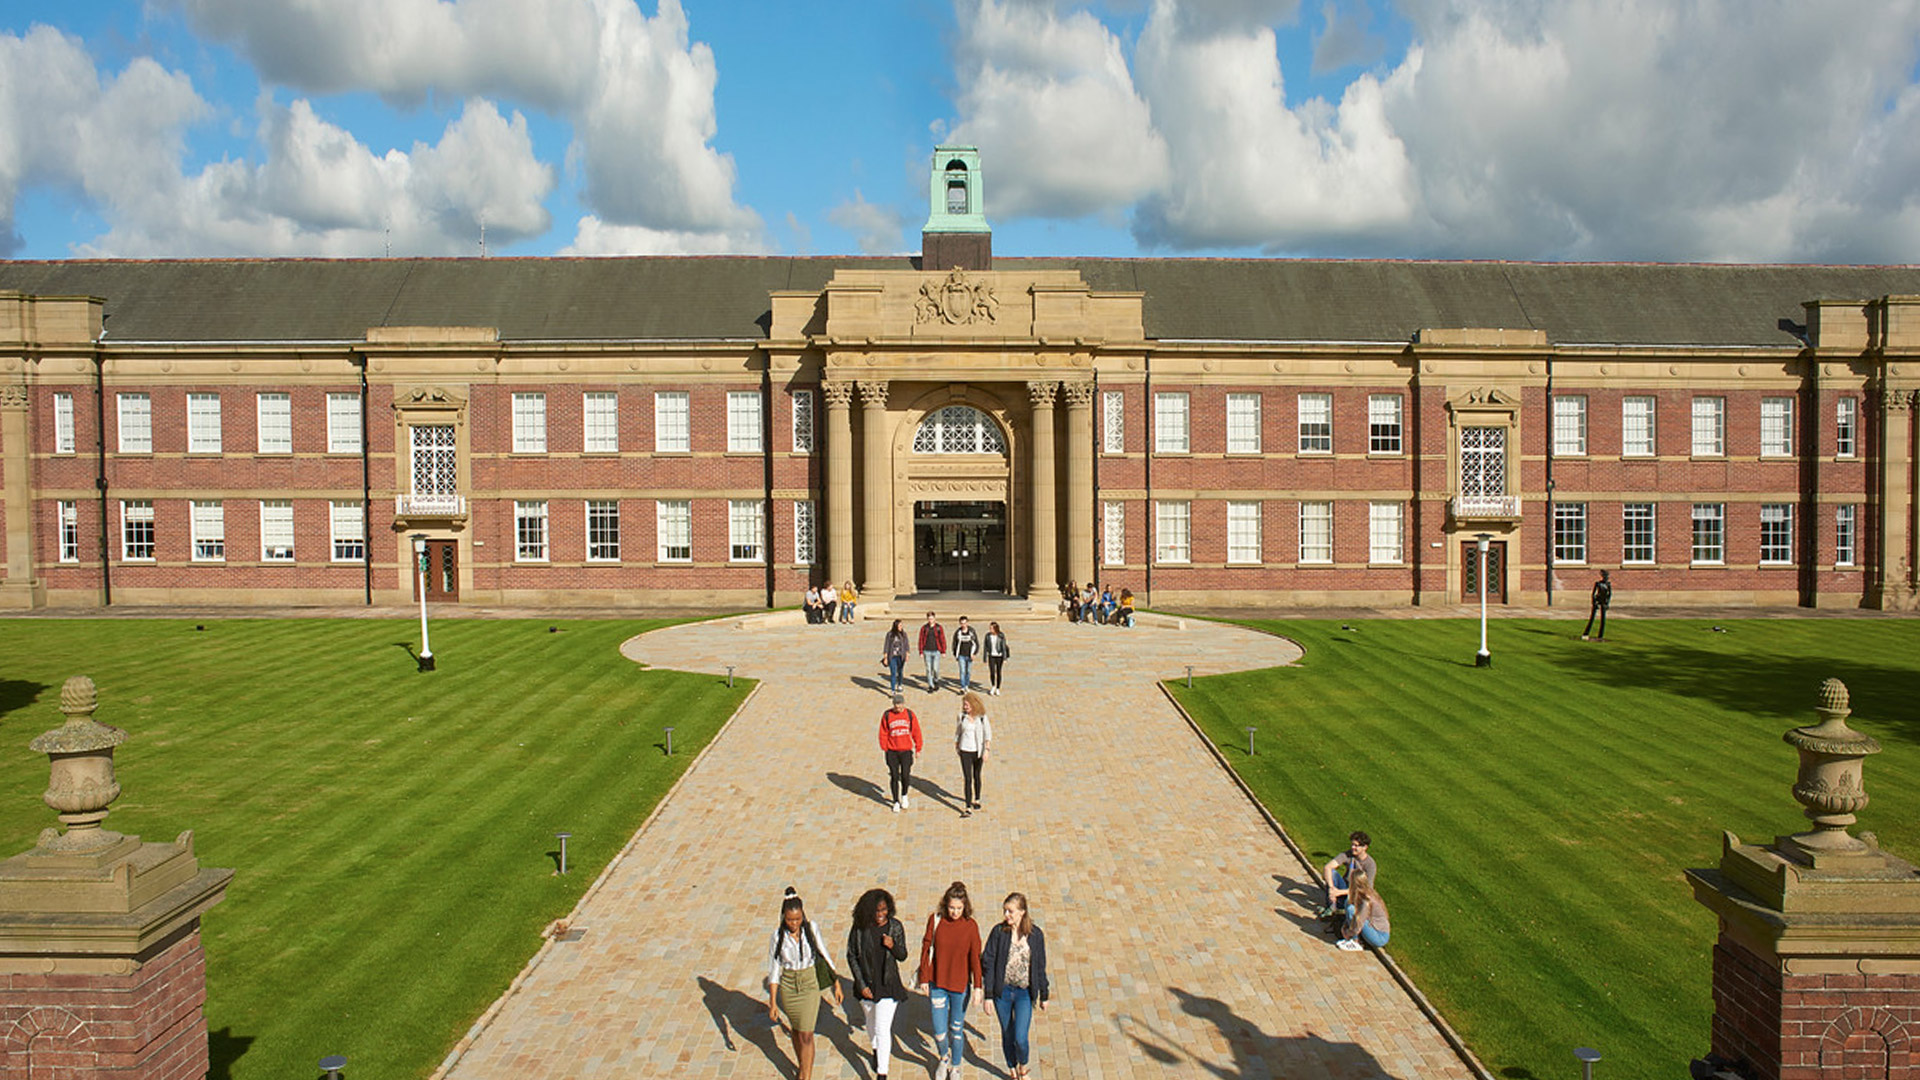 An aerial image of the Main Building entrance with students walking along the main walkway